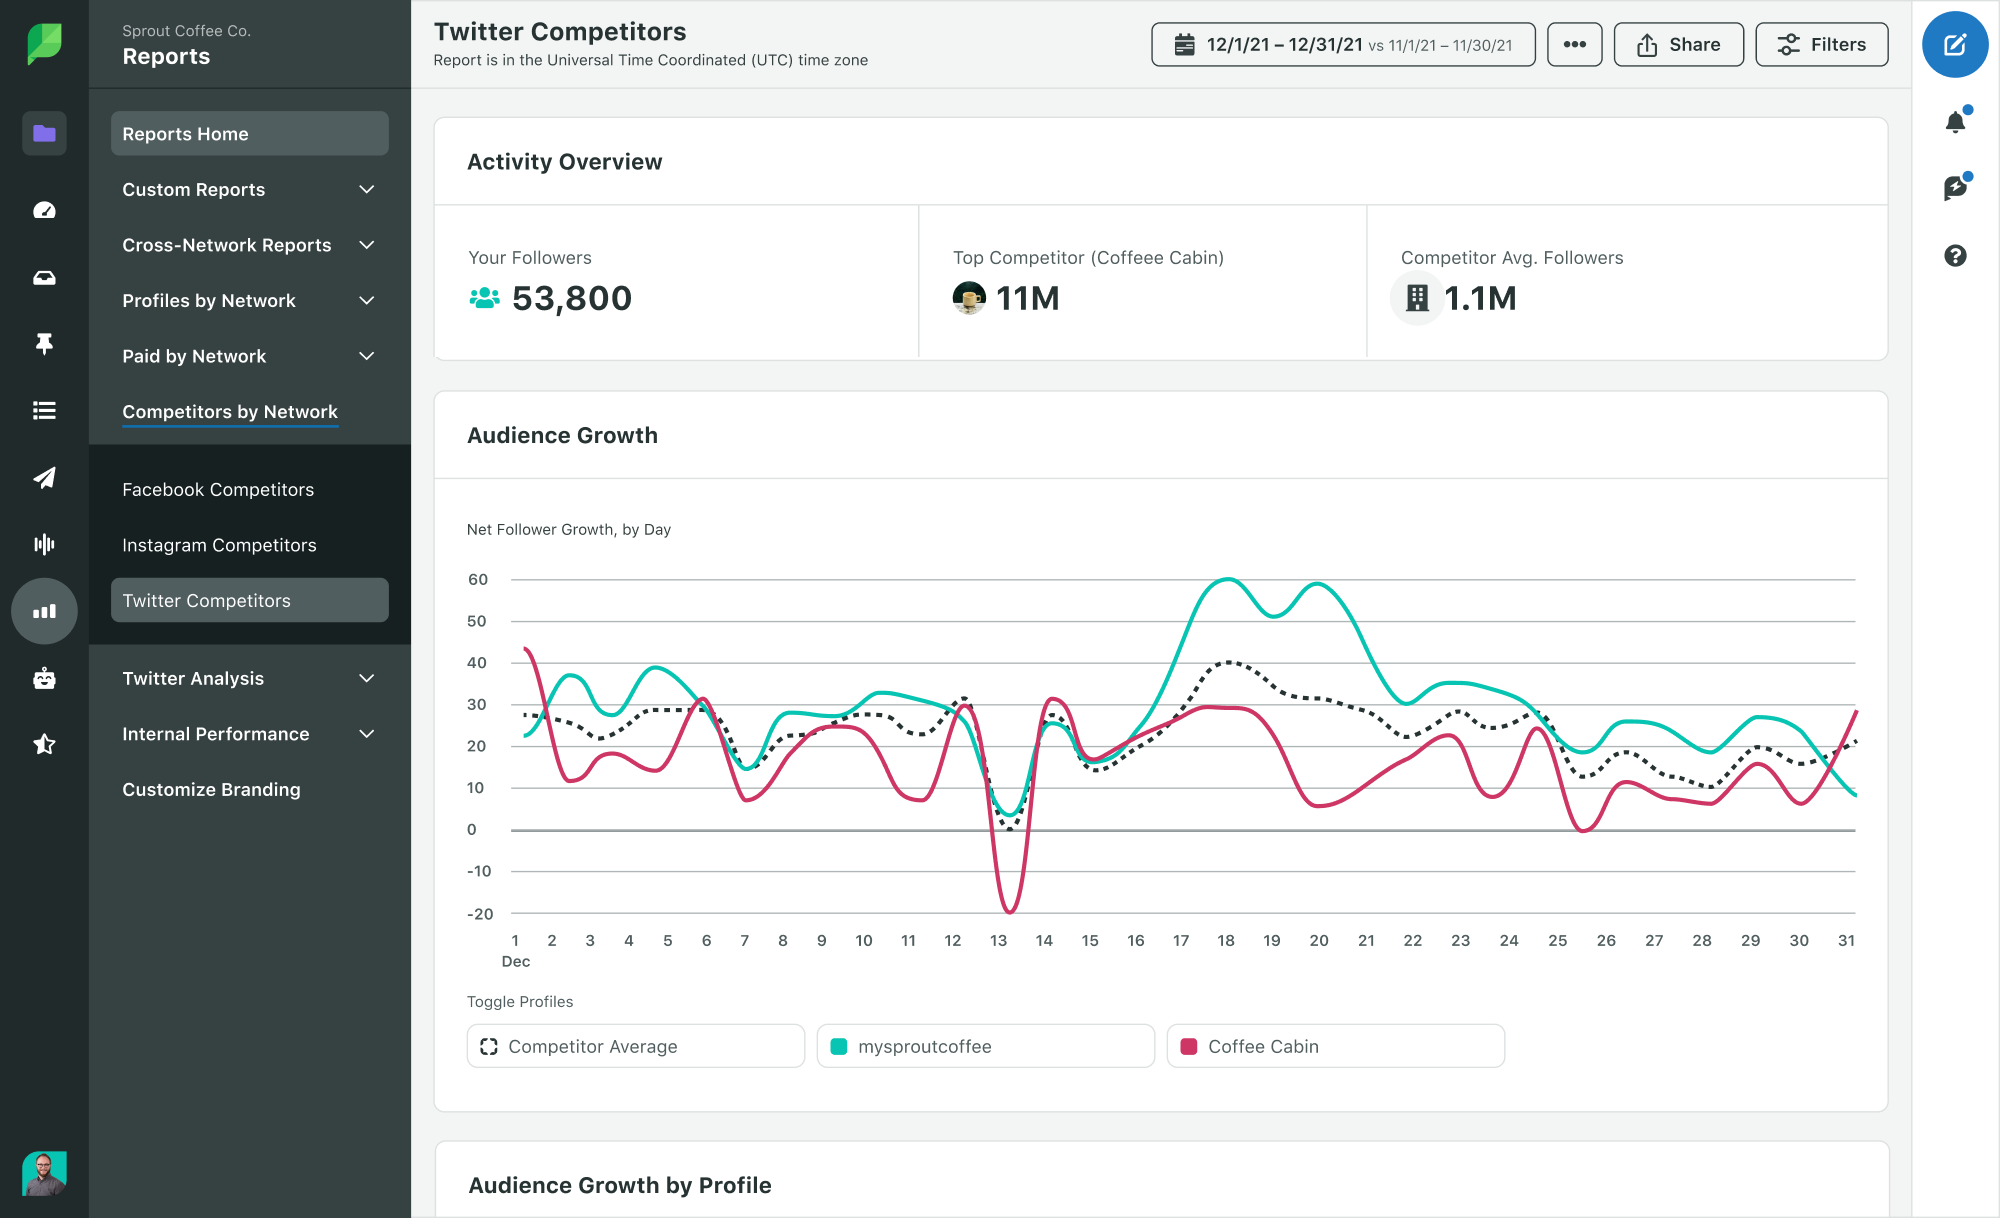 Sprout competitor report for Twitter